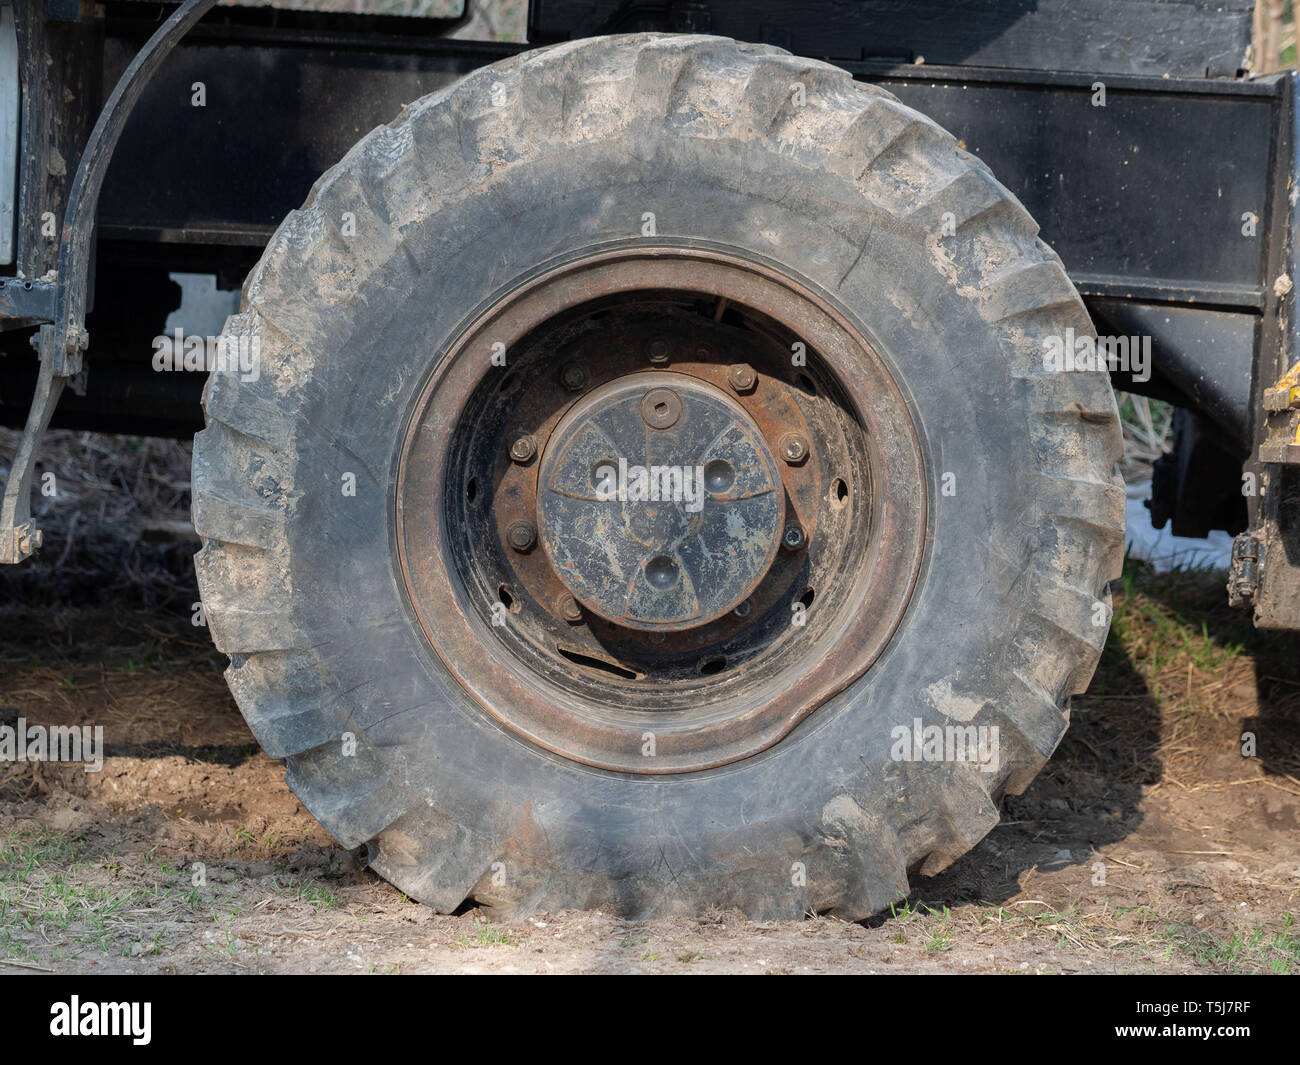 Big tire of a construction vehicle Stock Photo